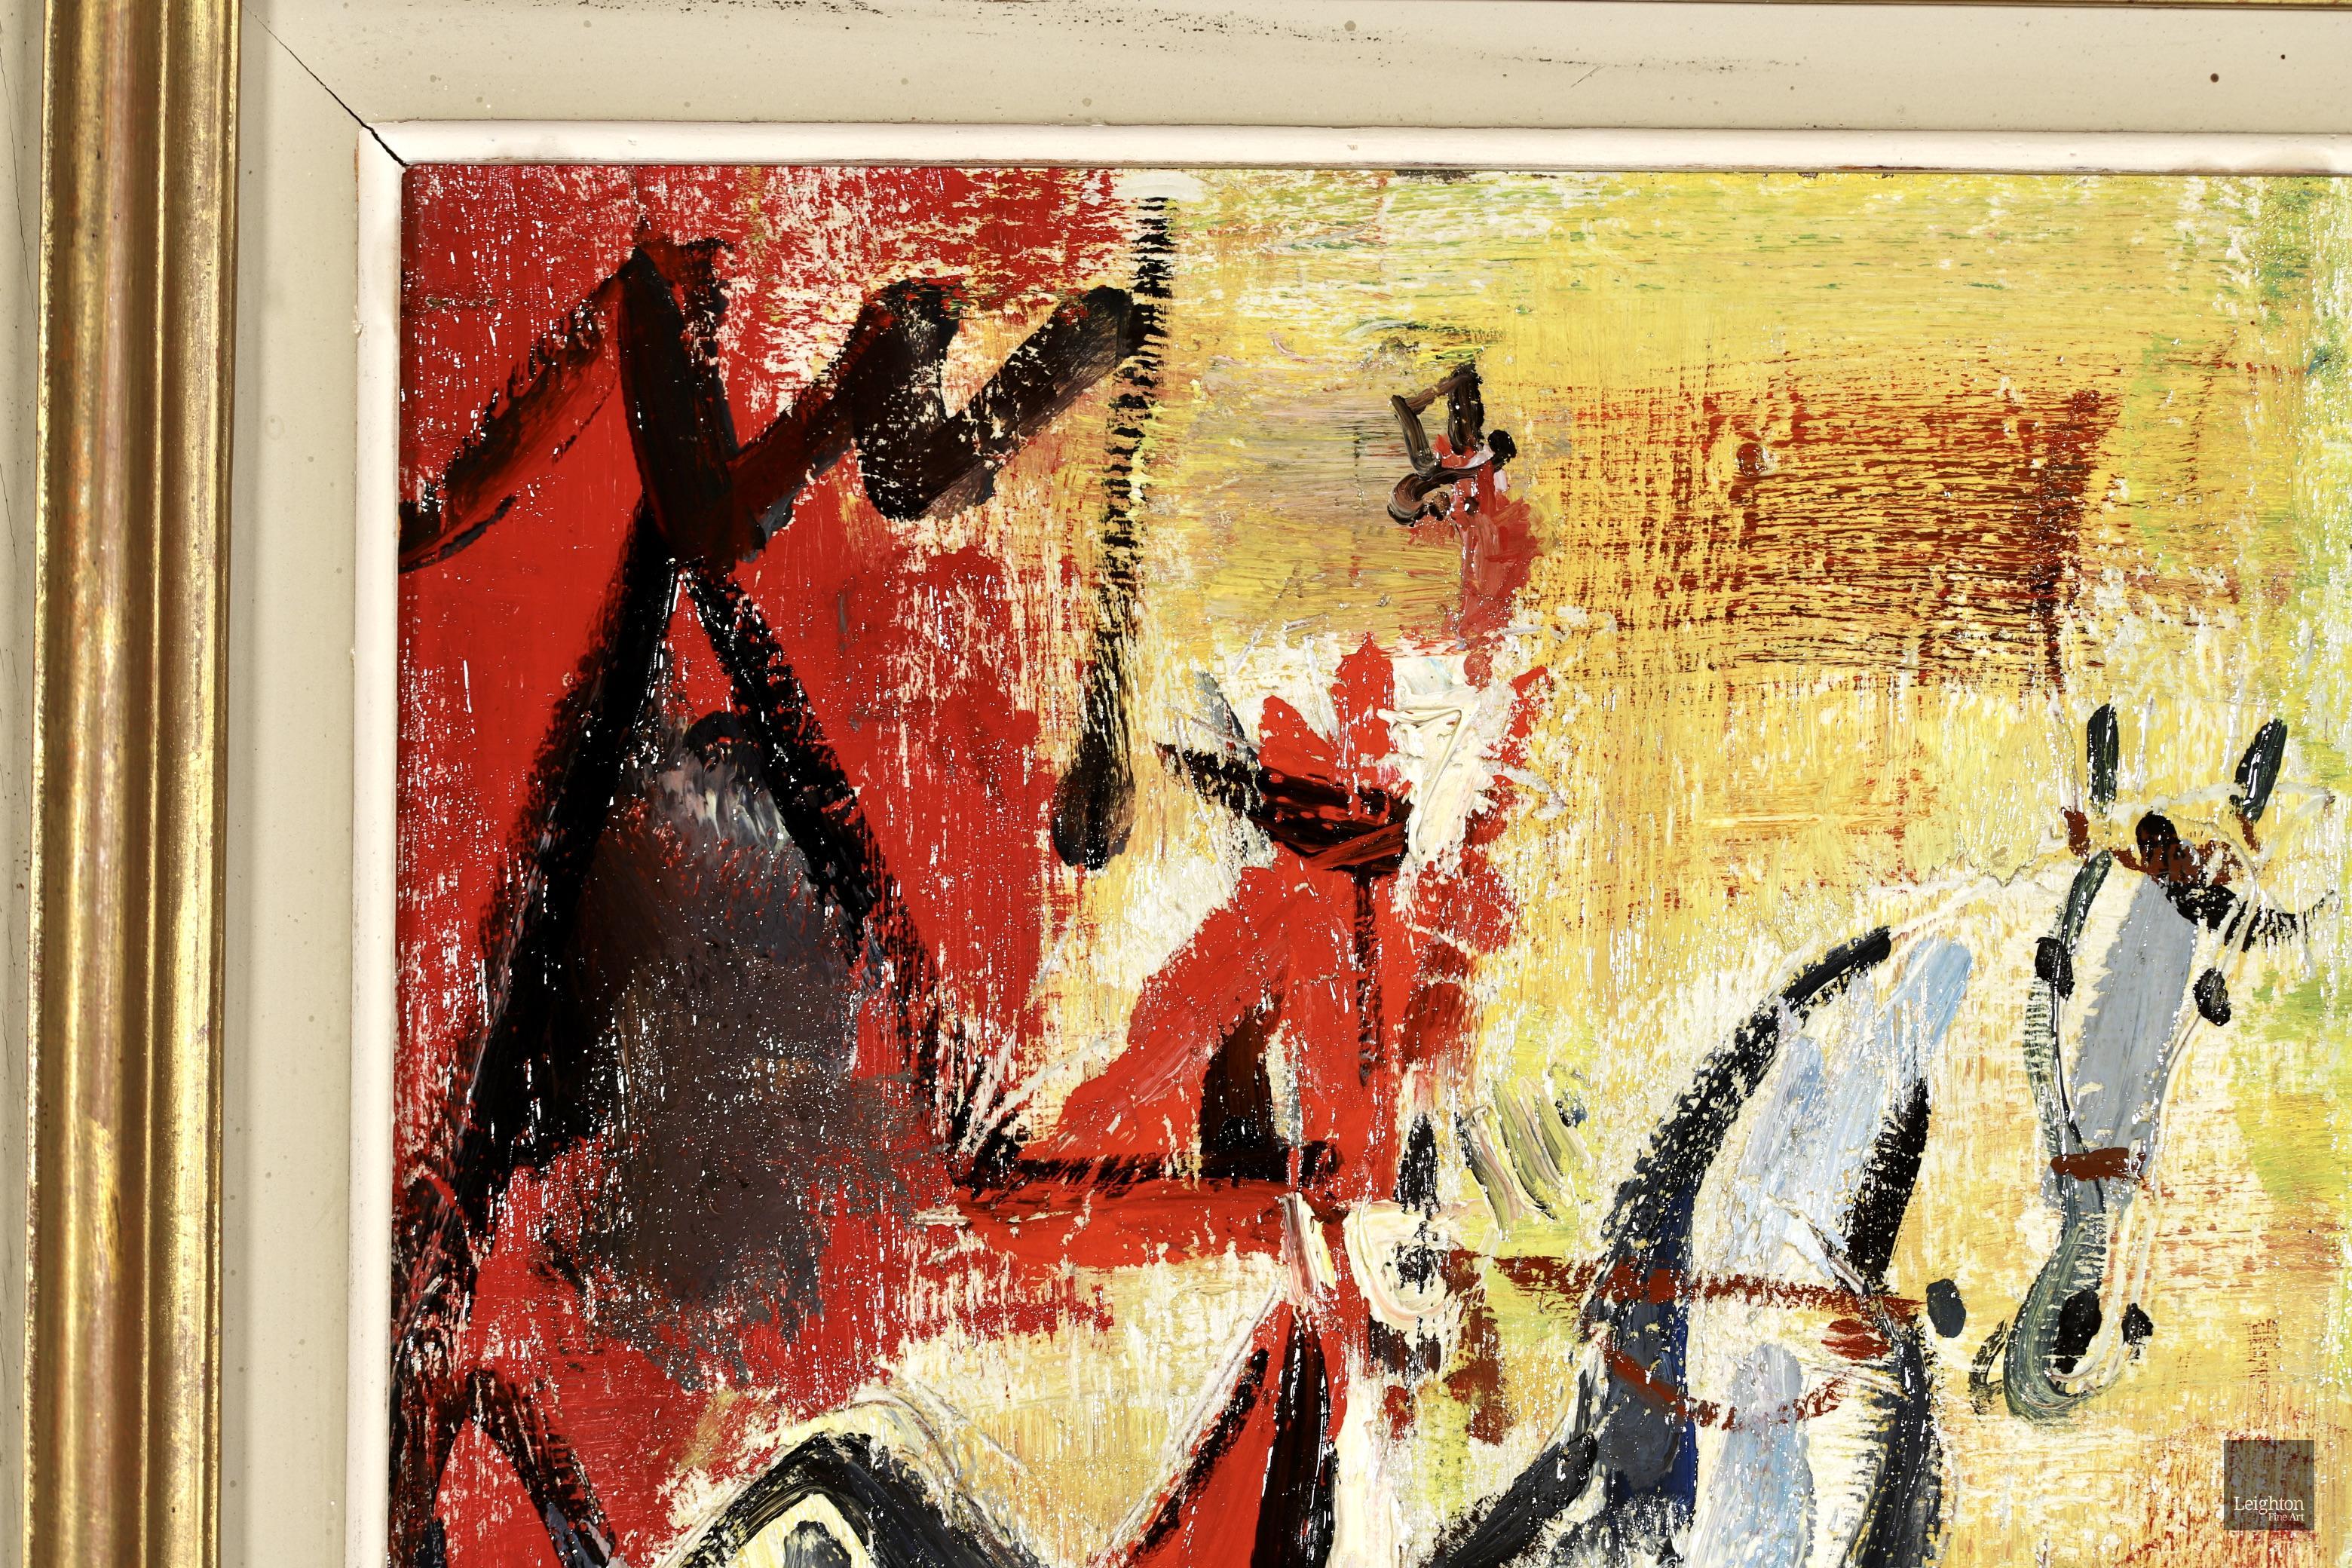 Signed expressionist oil on board portrait circa 1950 by French painter and engraver Gen Paul. This charming work depicts a jockey wearing red jacket and breeches seated on a white horse. This work is likely a painting of the fictional character Don